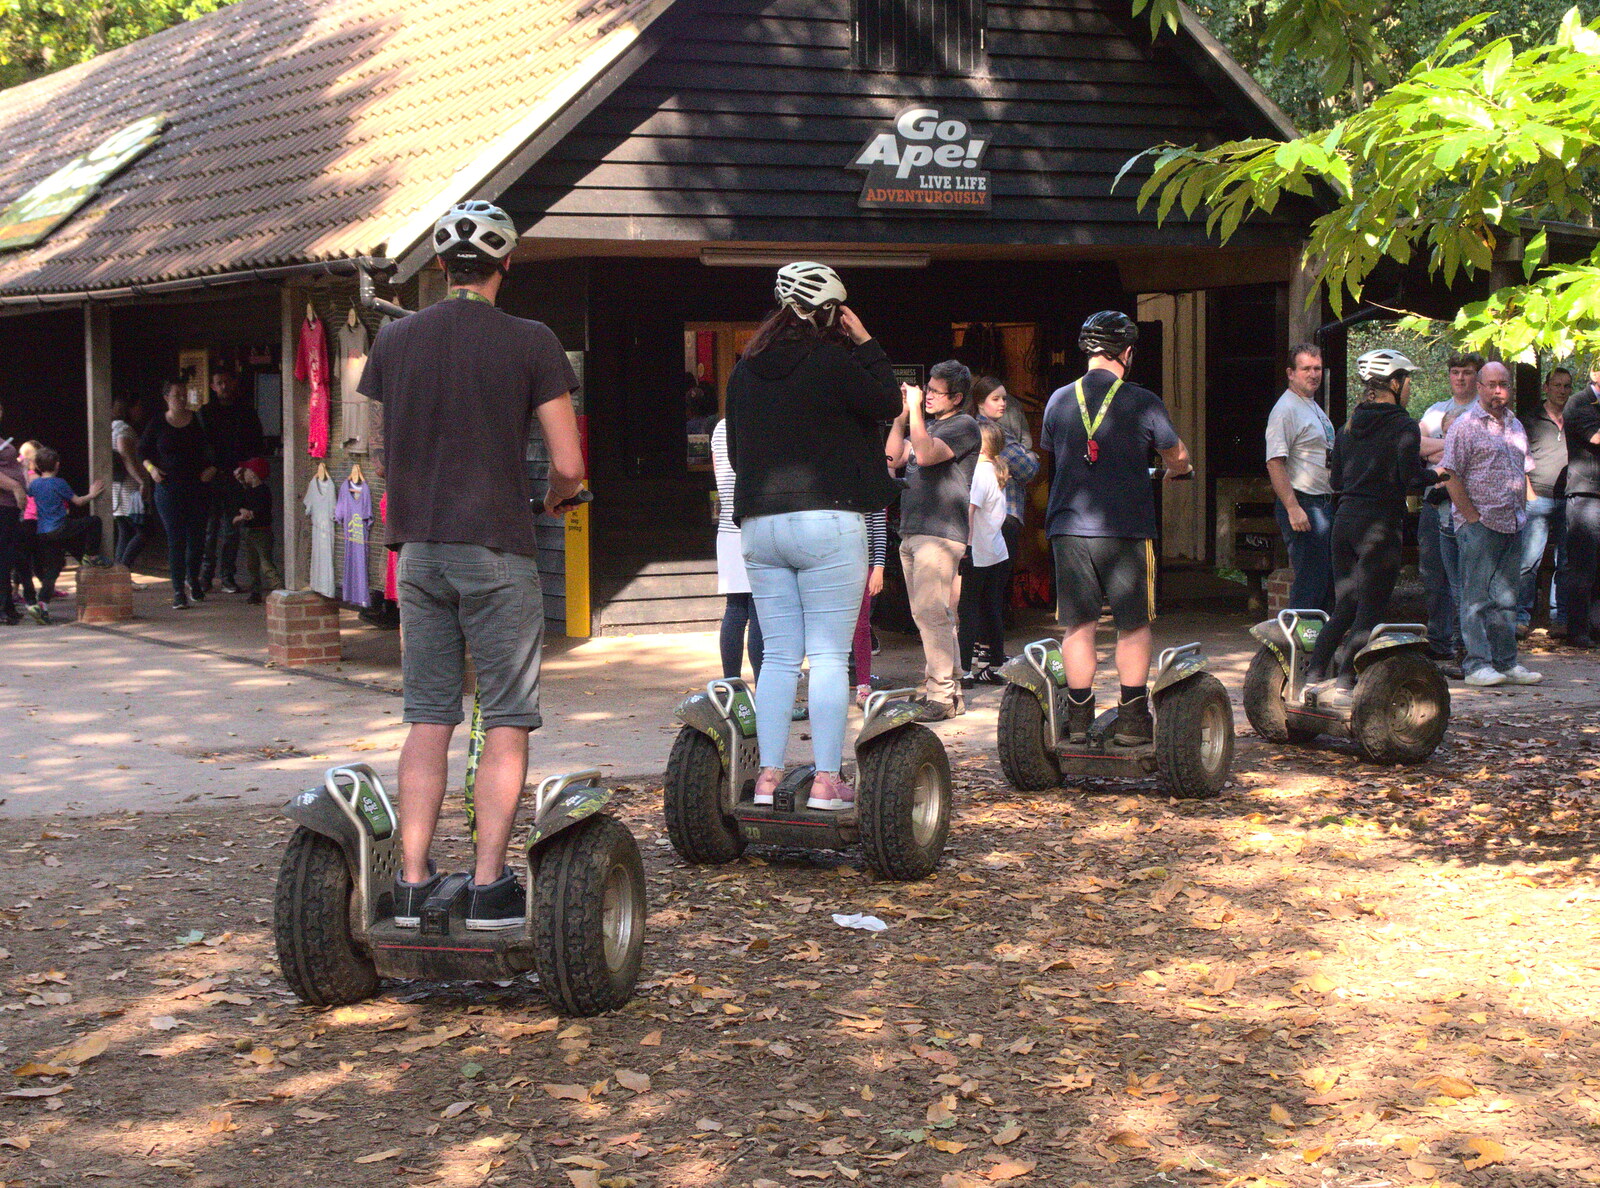 A bunch of Segway riders roll in from Fred Goes Ape, High Lodge, Brandon, Suffolk - 24th September 2017